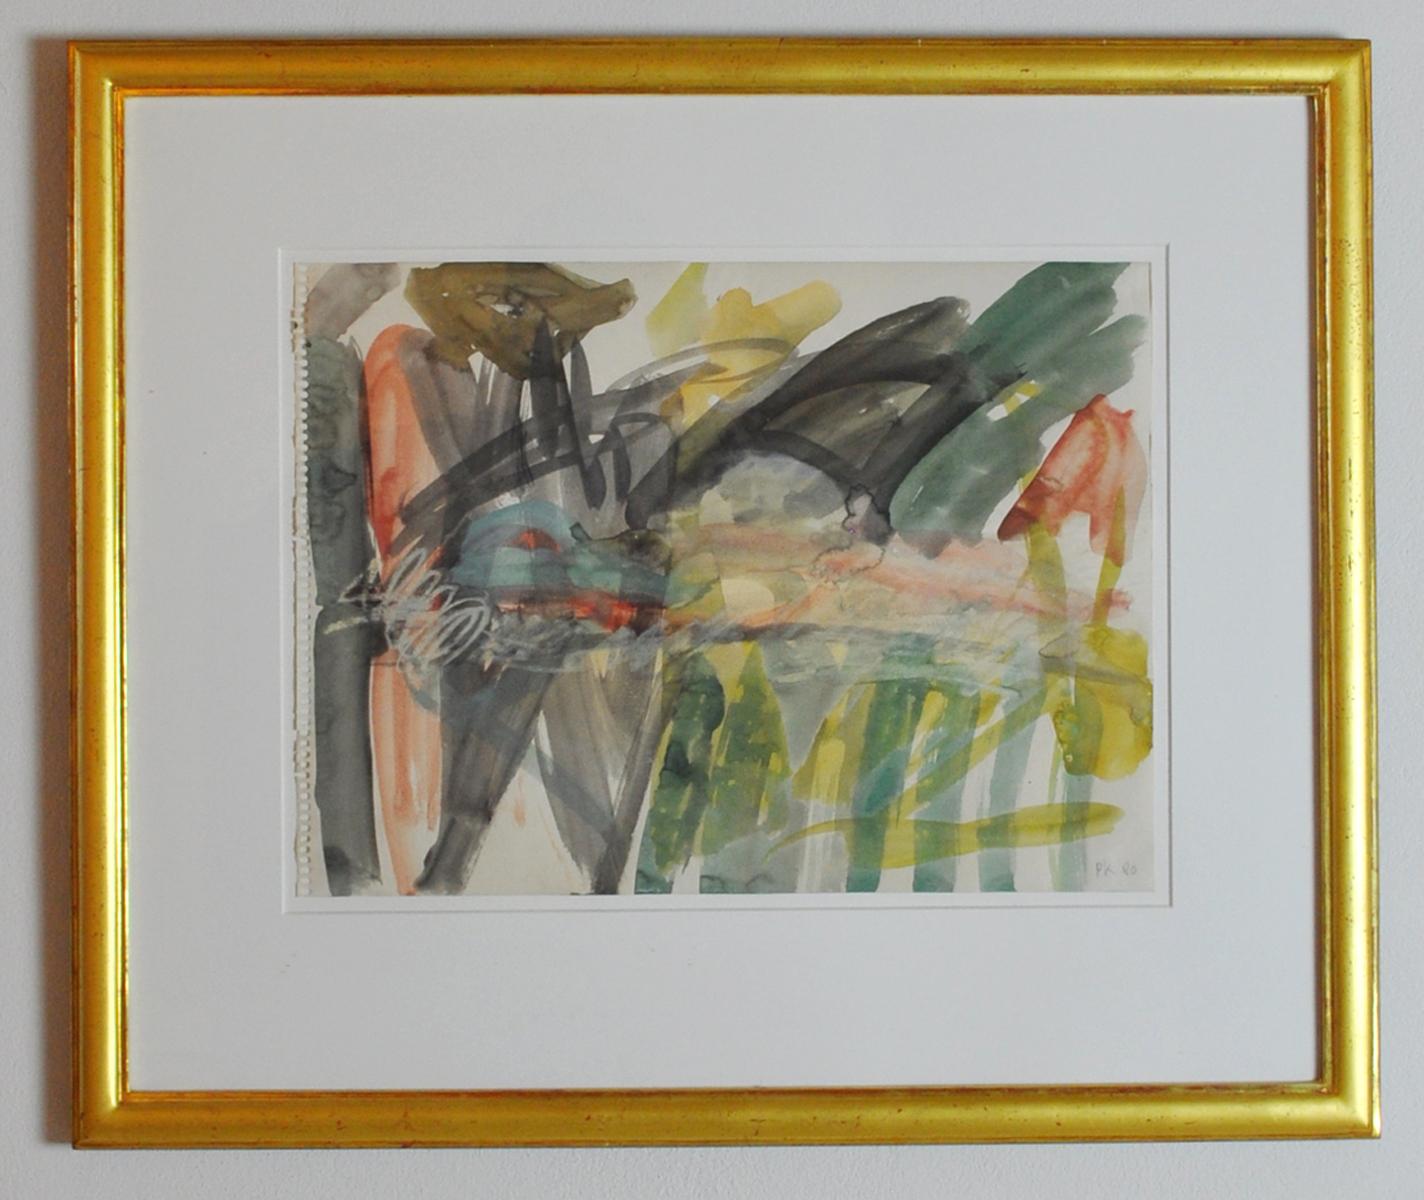 Per Kirkeby,
Watercolour 1980, Signed
Gold leaf frame incl. 

Artwork size: 31 cm H x 42 cm W
Frame size: 52 cm H x 61 cm W

Per Kirkeby (1938 - 2018), Danish painter, poet, film maker, graphic artist, sculptor and geologist. He created an